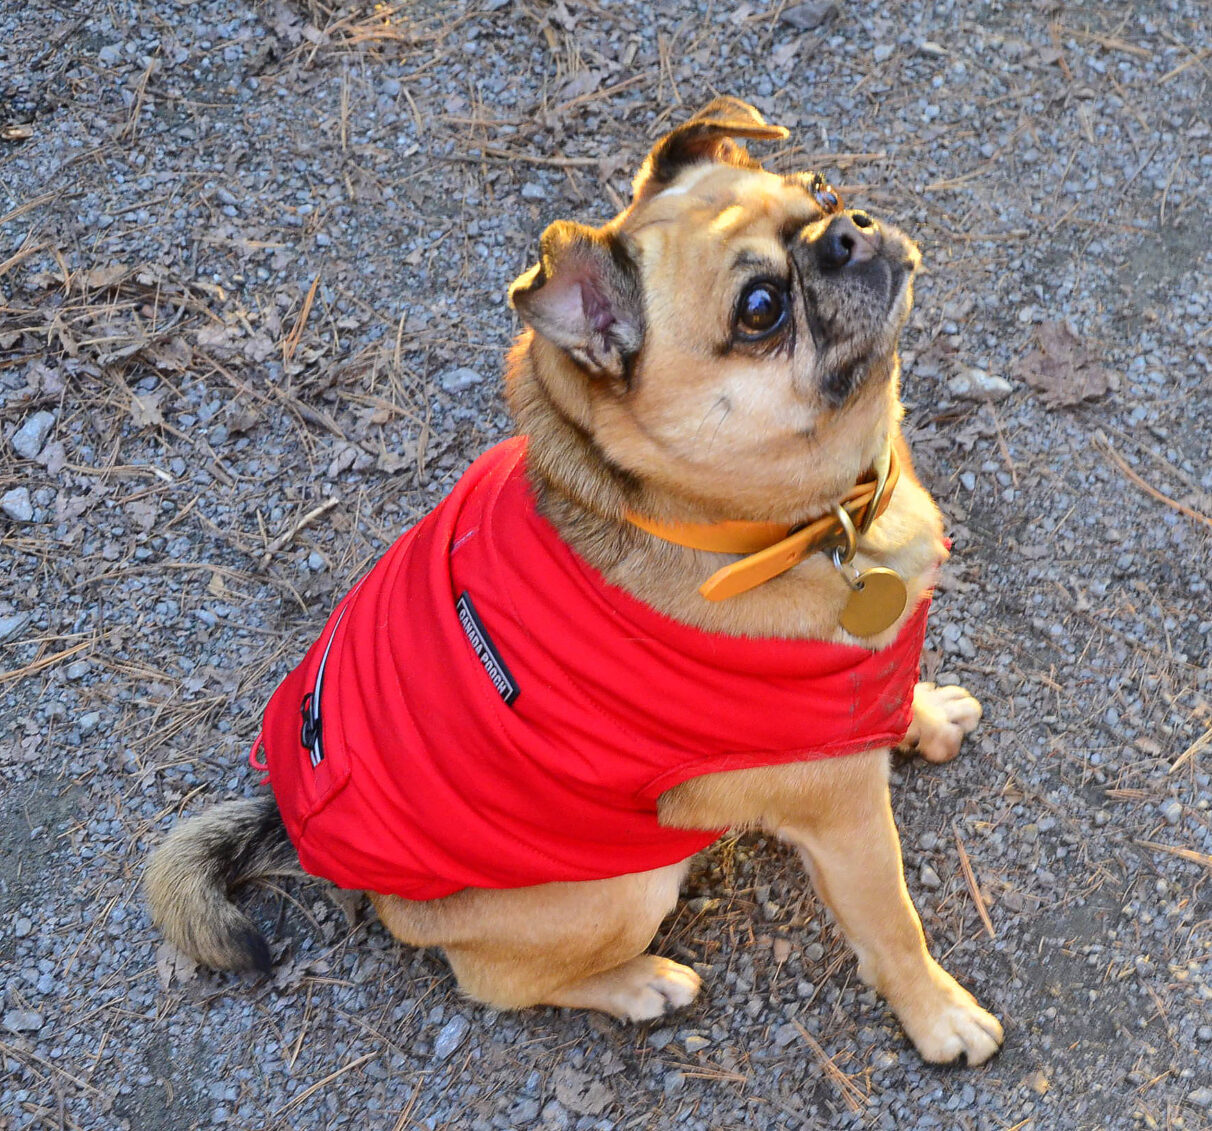 A small light tan dog poses while wearing a red jacket and an orange collar.